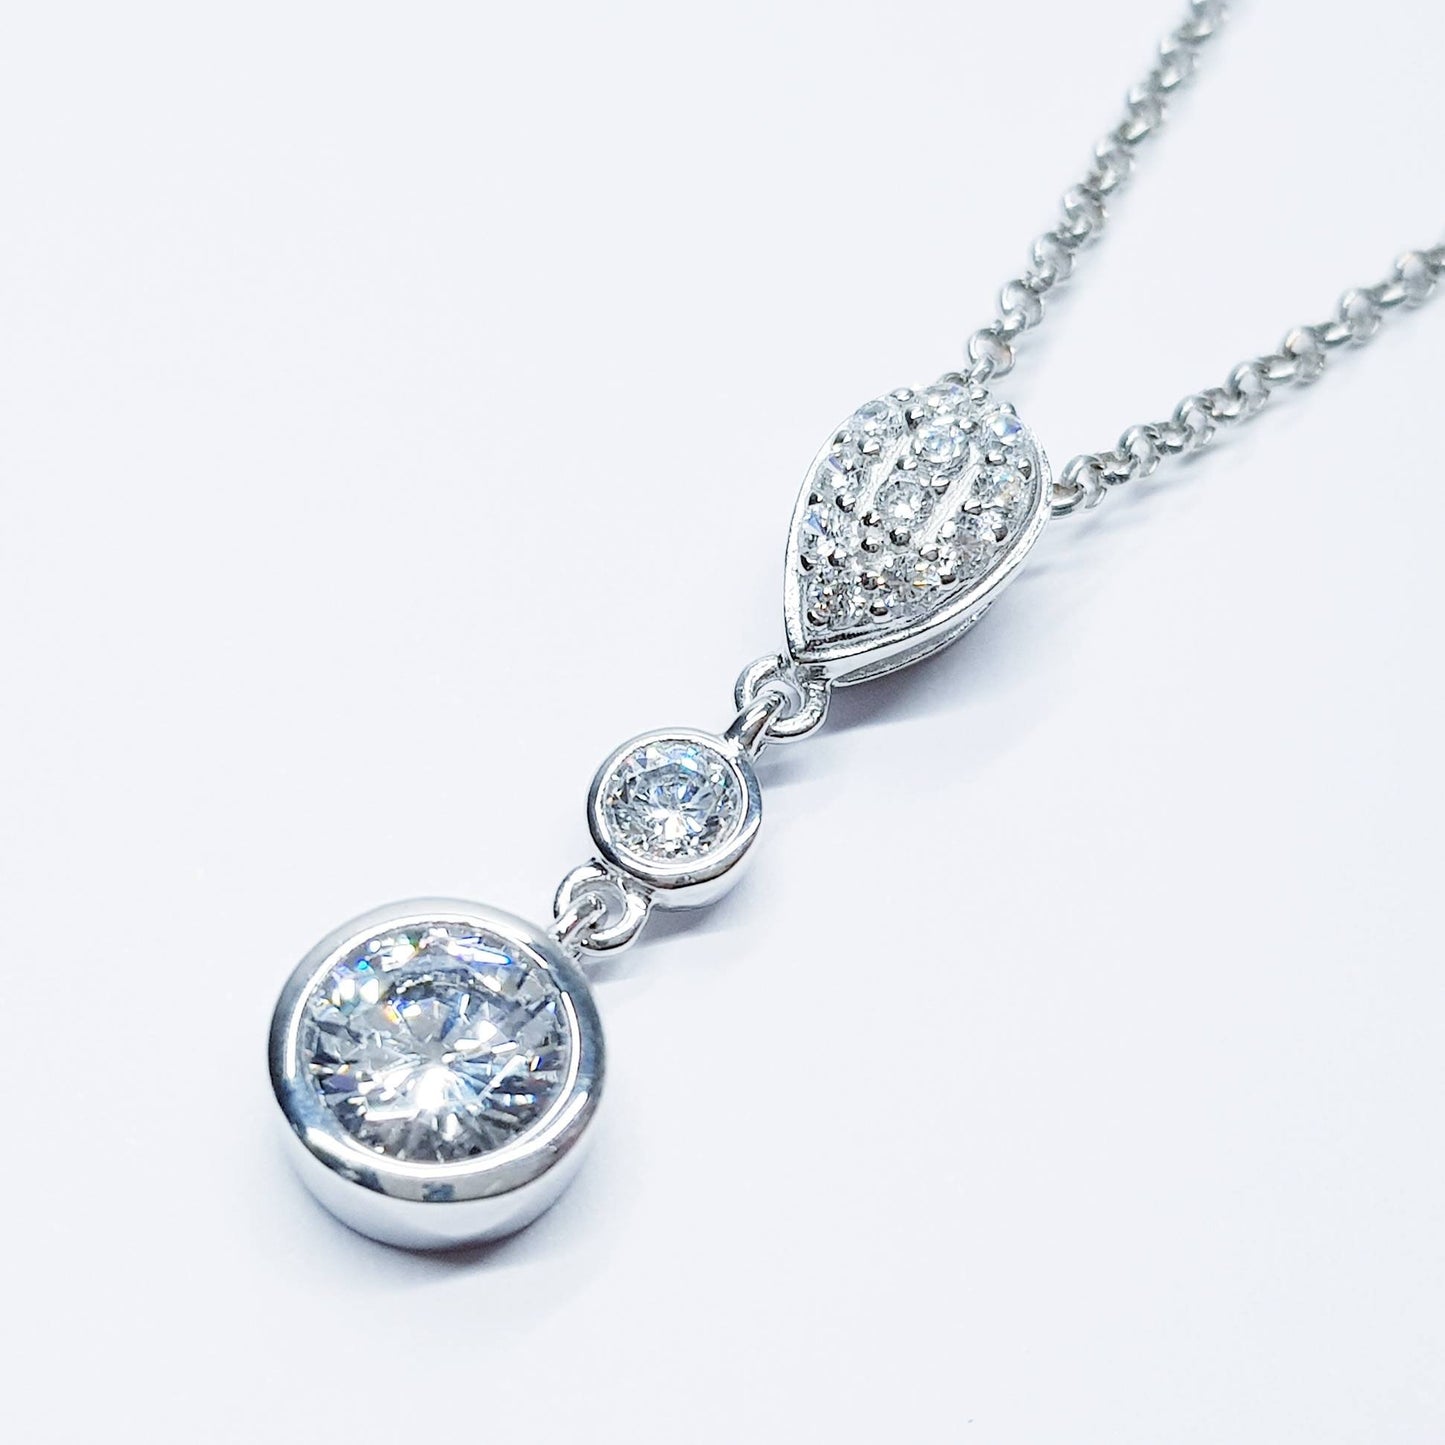 Elegant cubic zirconia pendant  floating on sterling silver chain